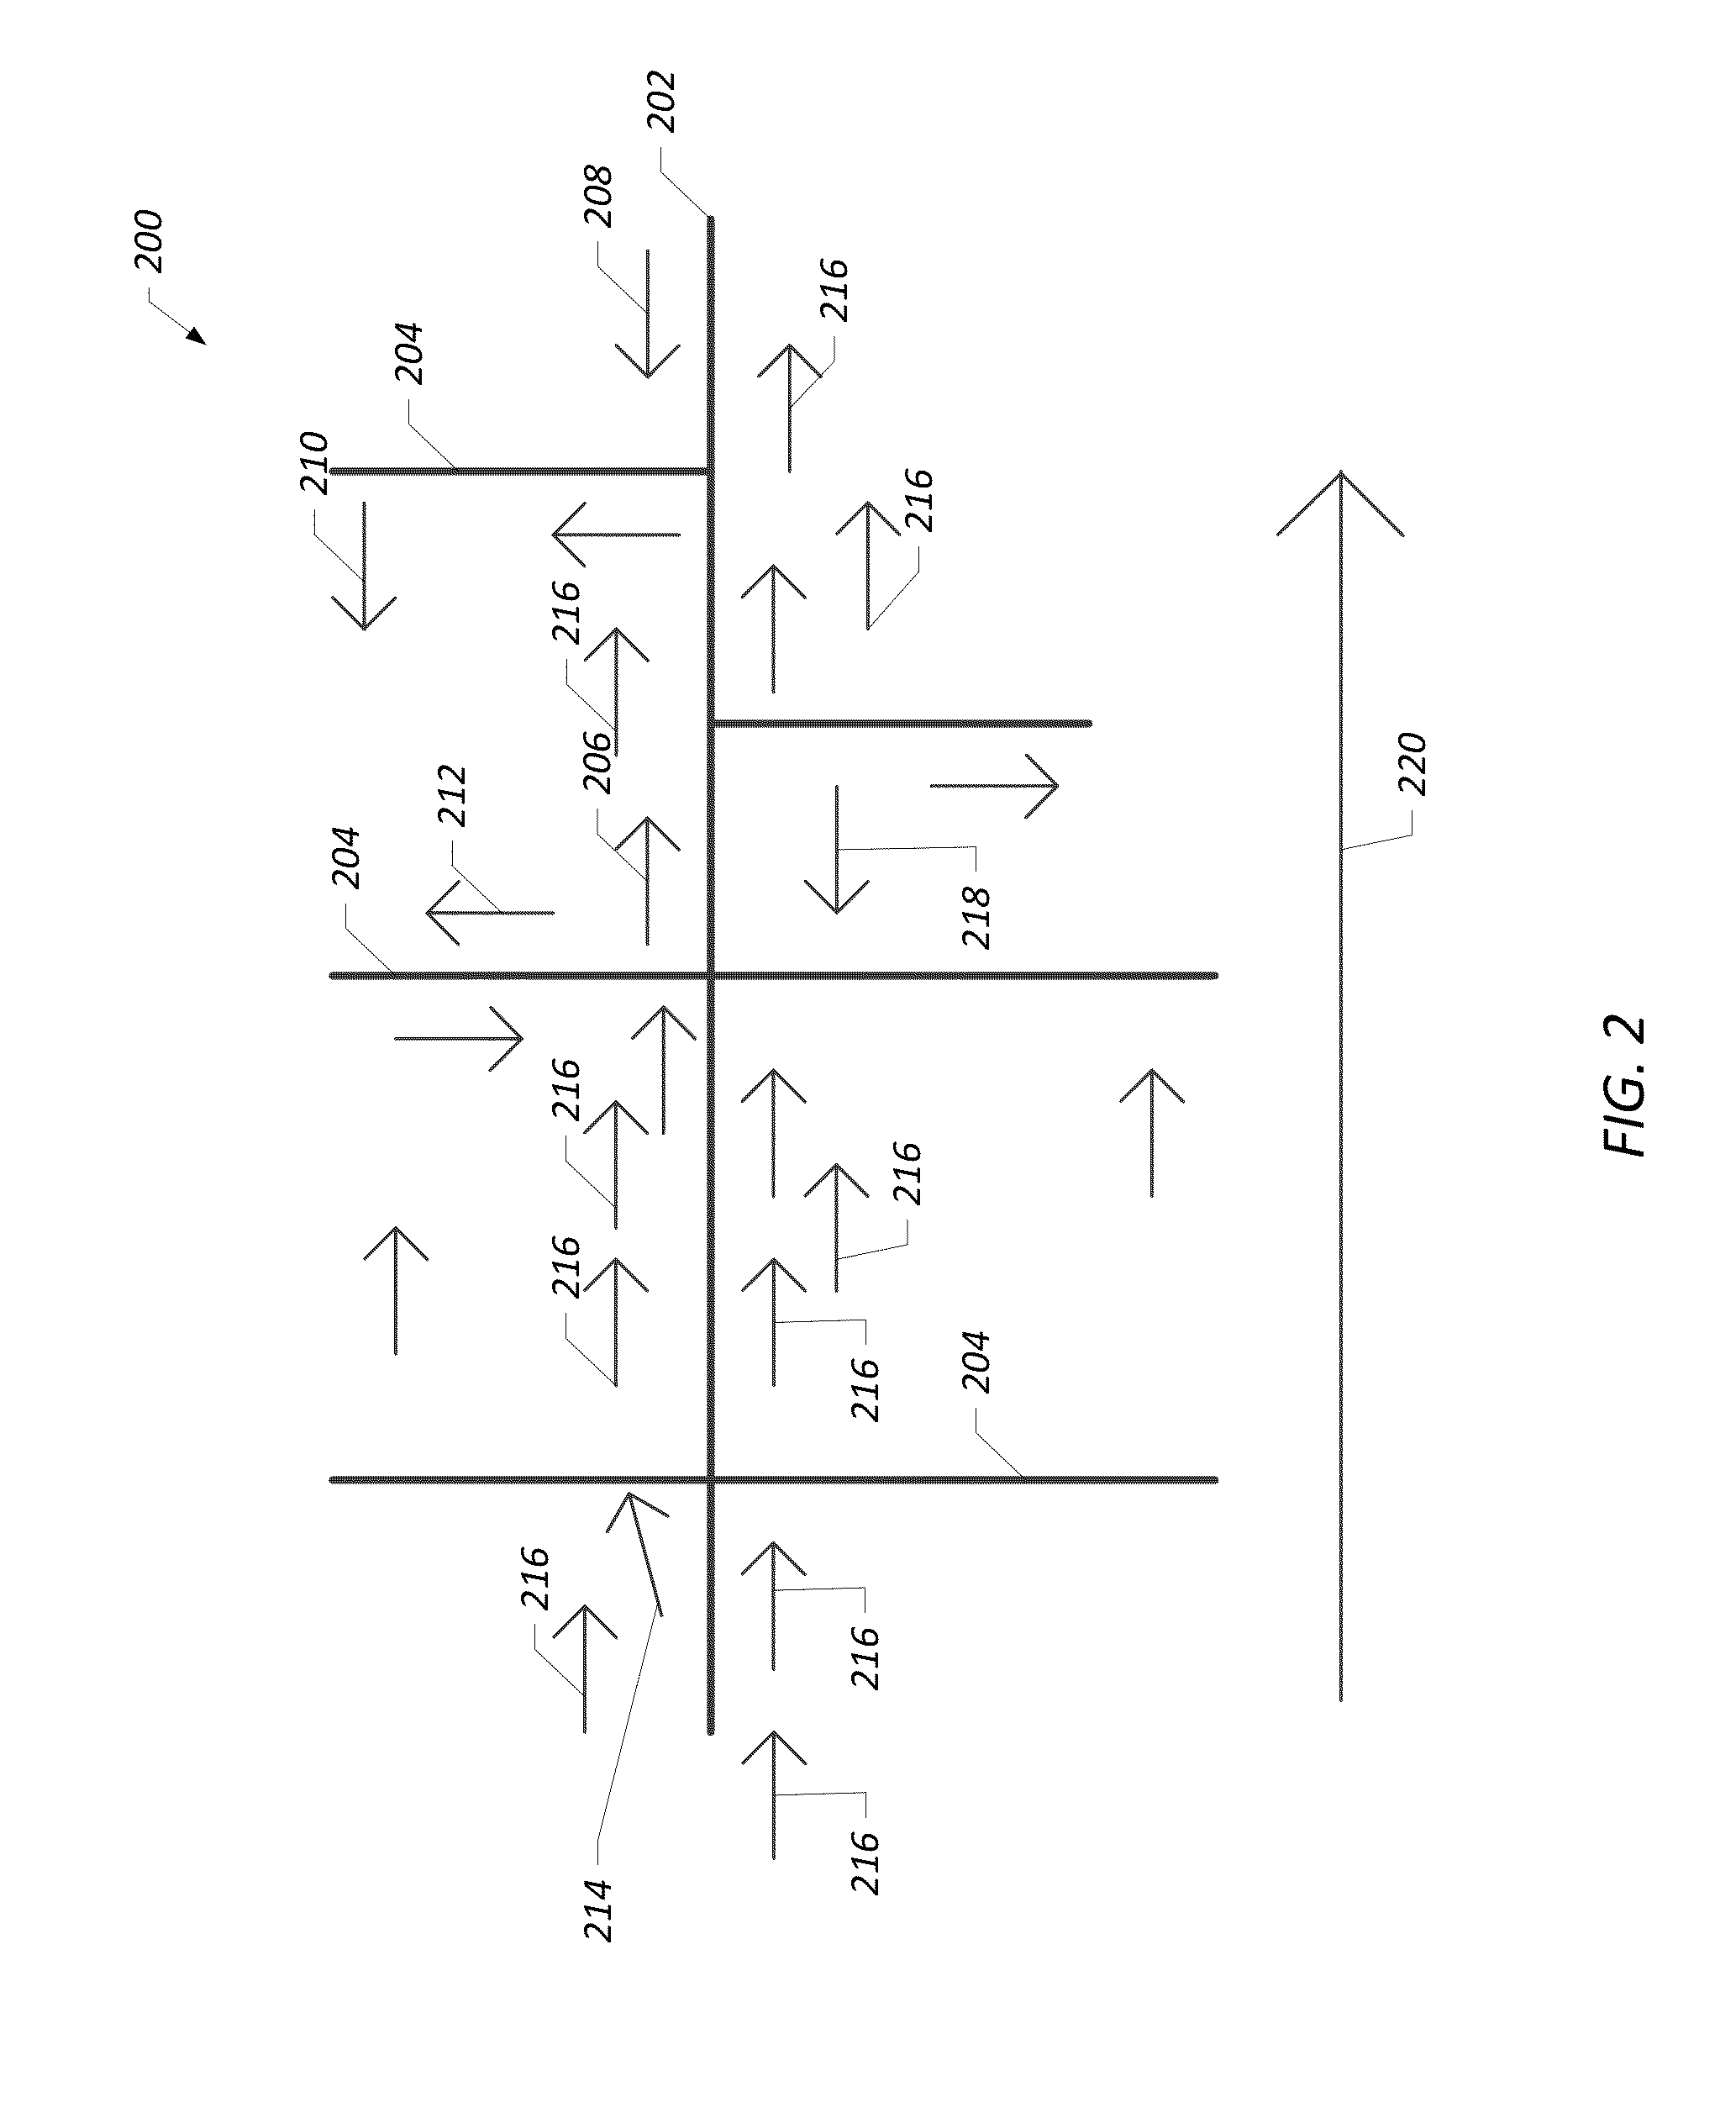 Systems, methods, and computer-readable media for verifying traffic designations of roads